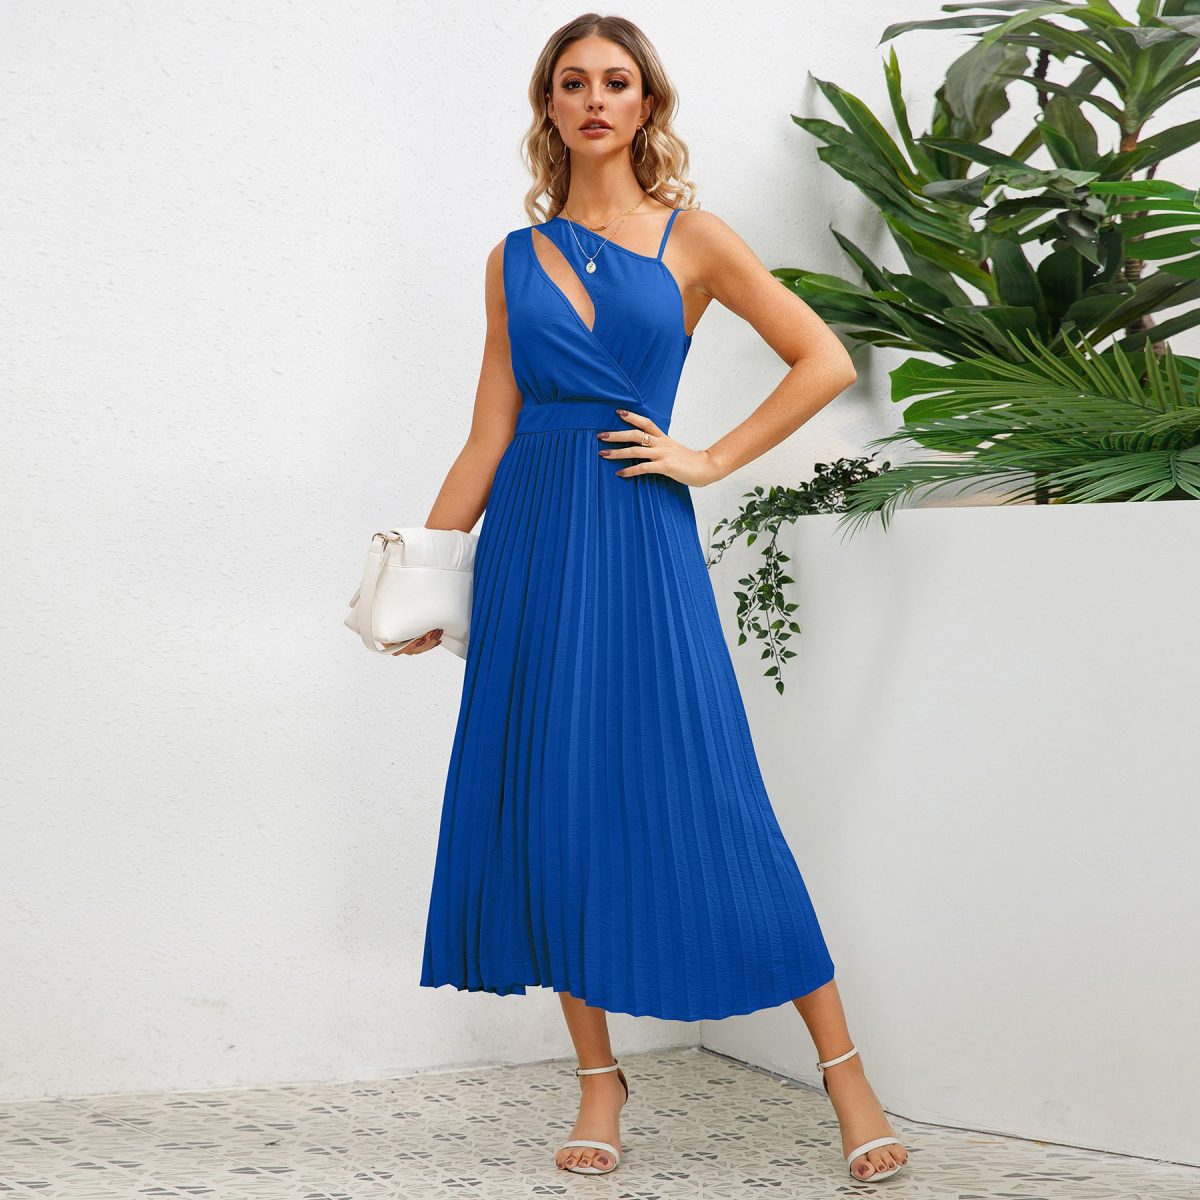 Sexy Slim Mid Length Pleated A Line Dress in Dresses